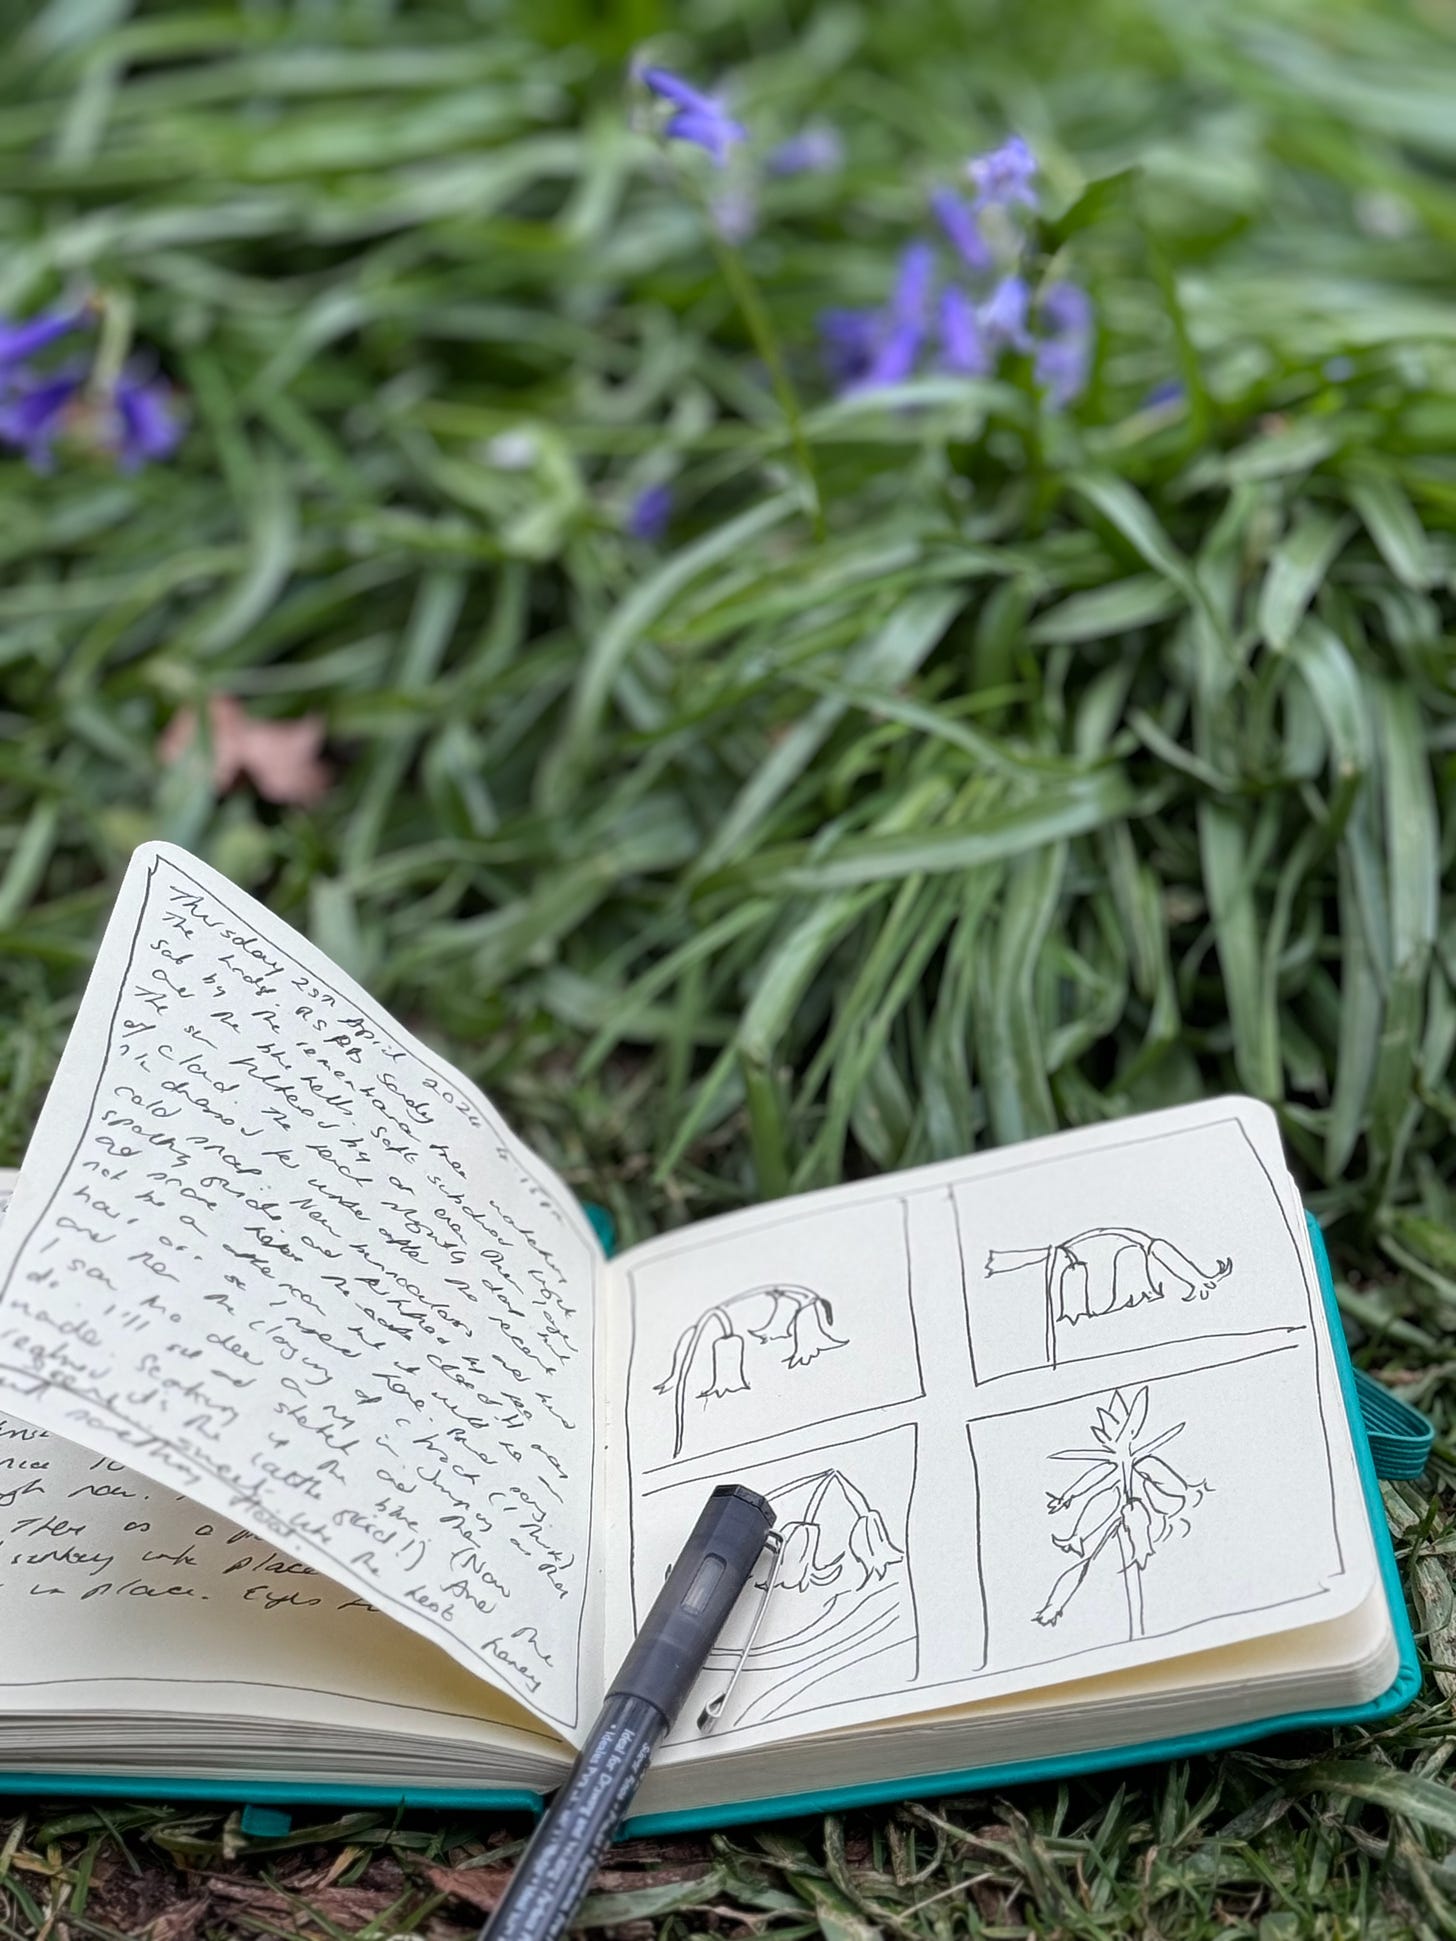 Out of focus bluebells with small square sketchbook showing writing which is transcribed in the post below. On the right side of the sketchbook are 4 small pen sketches of bluebells.